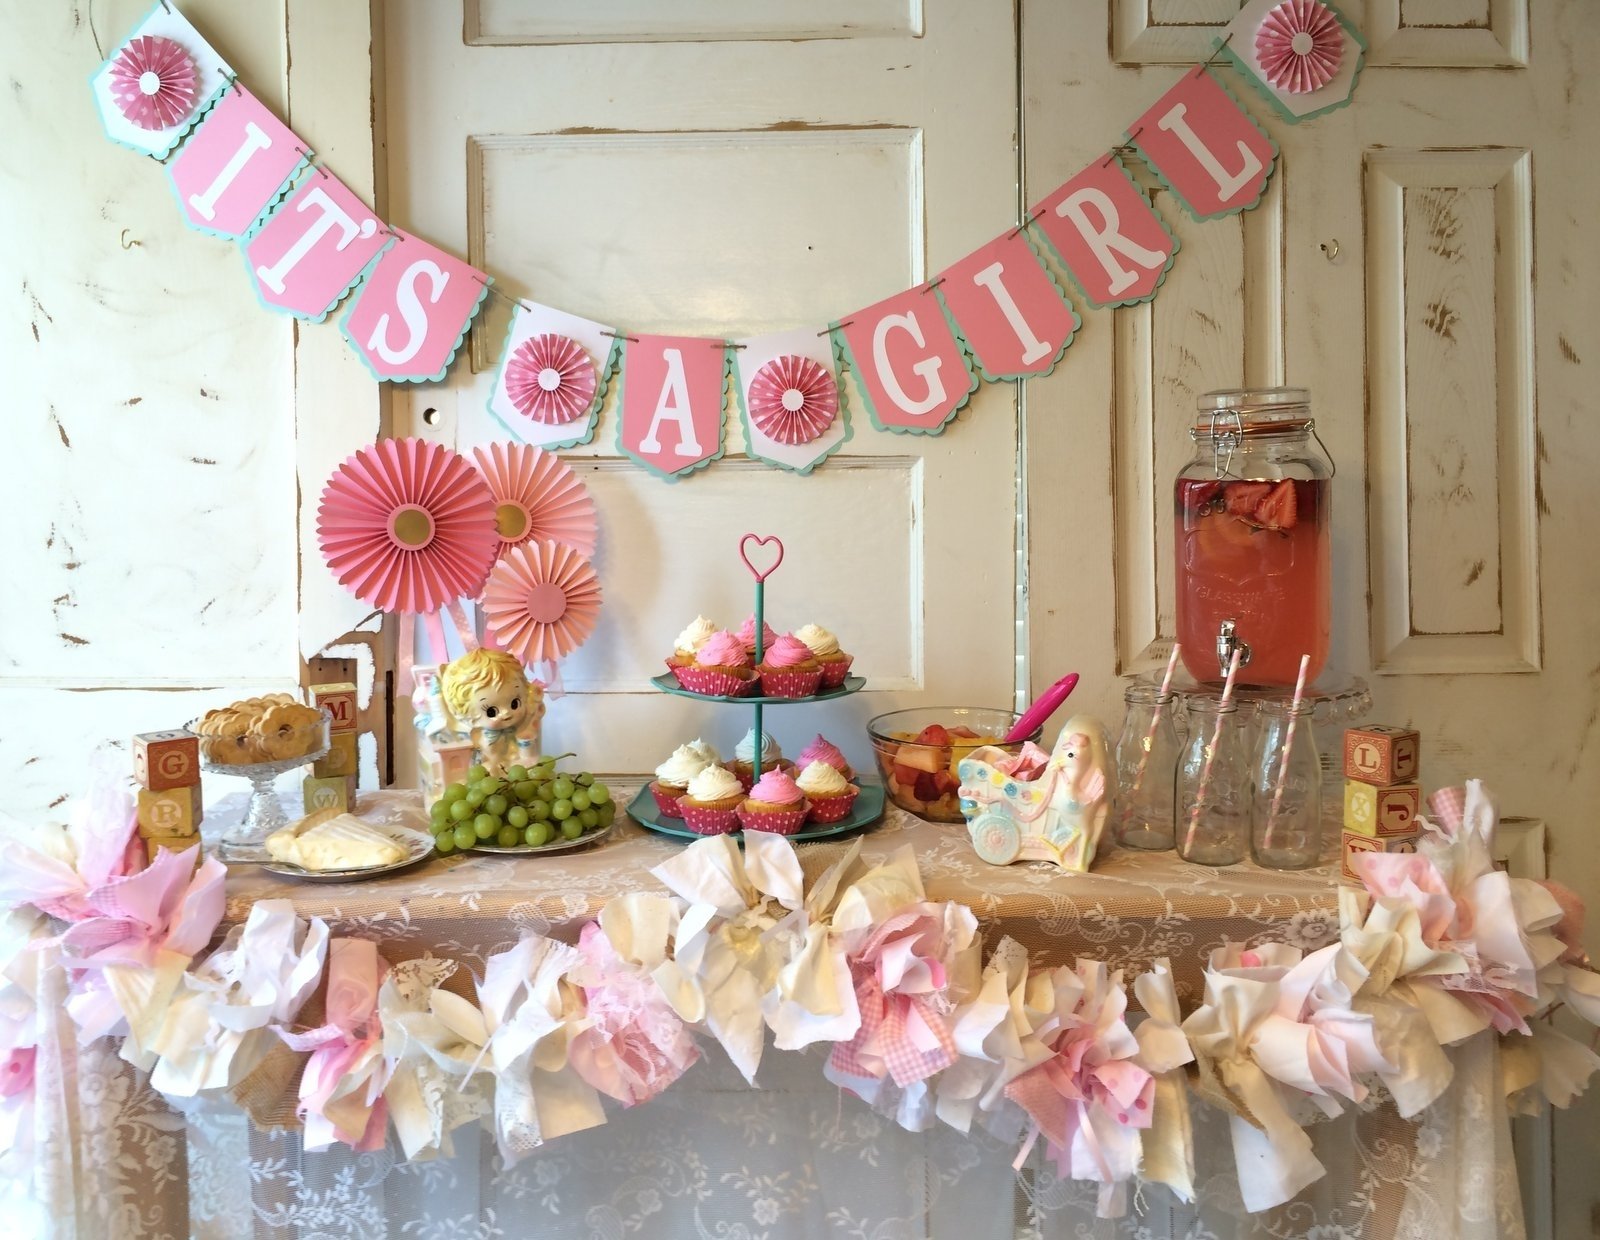 10 Awesome Girl Themed Baby Shower Ideas party decorating ideas its a girl baby shower decorations loversiq 2 2022